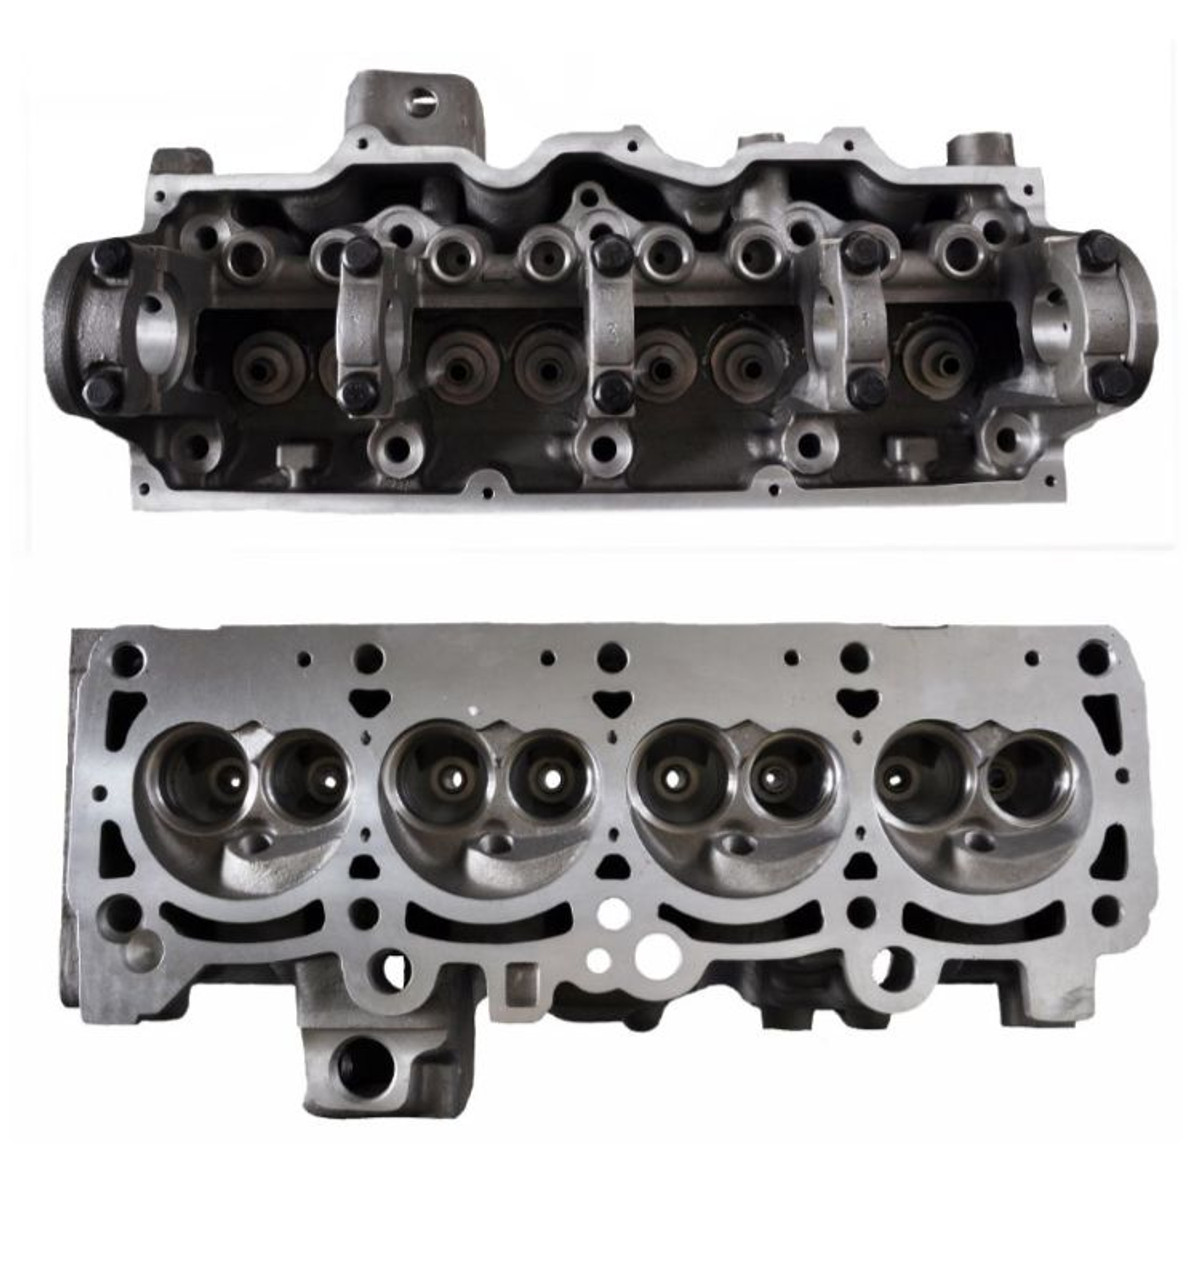 1988 Plymouth Reliant 2.2L Engine Cylinder Head EHCR135-1 -77